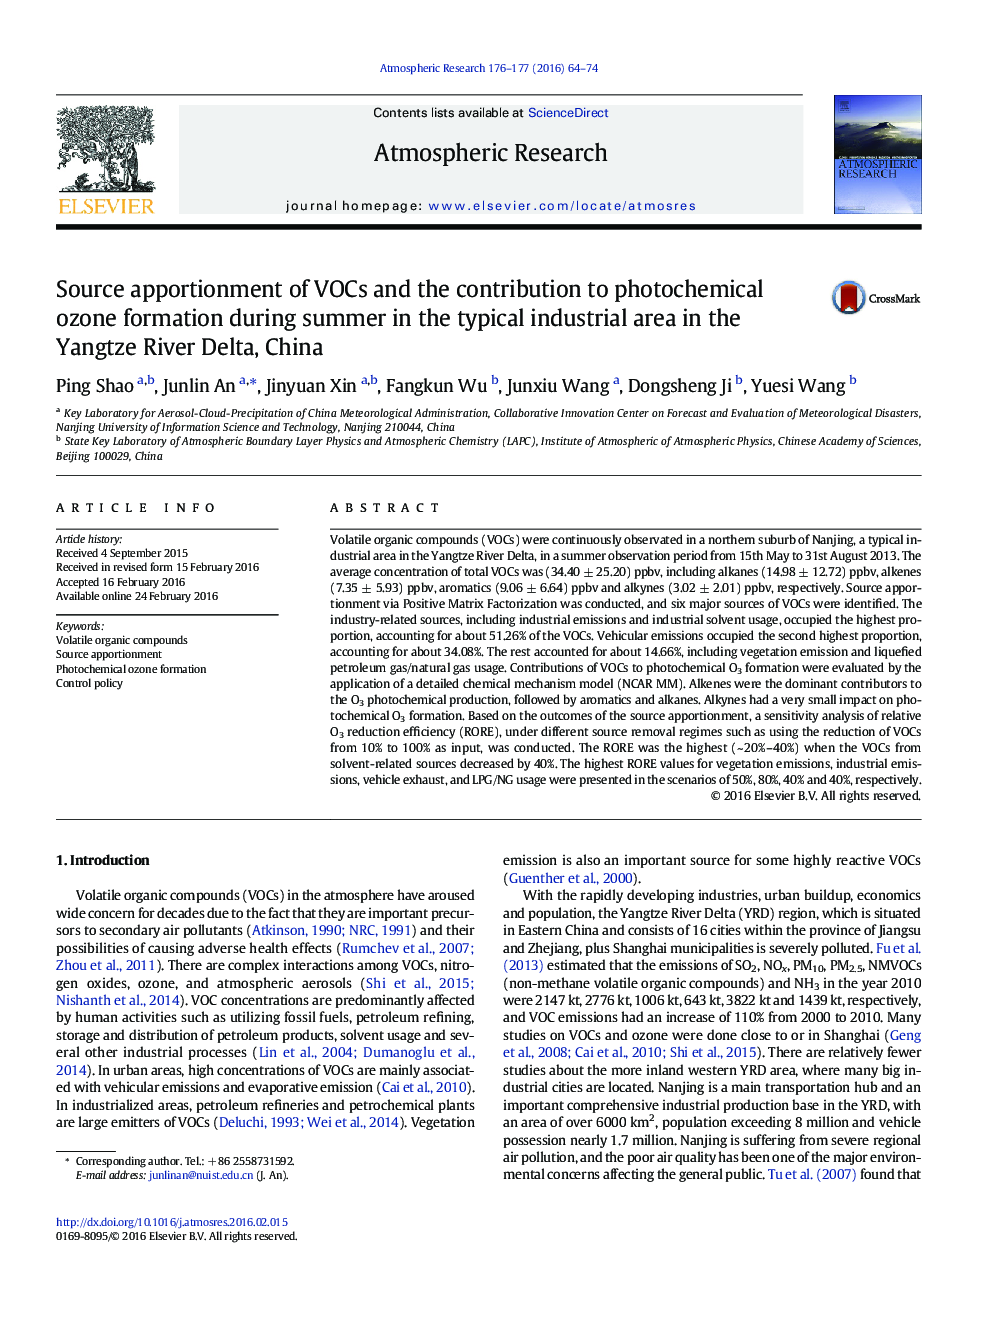 Source apportionment of VOCs and the contribution to photochemical ozone formation during summer in the typical industrial area in the Yangtze River Delta, China